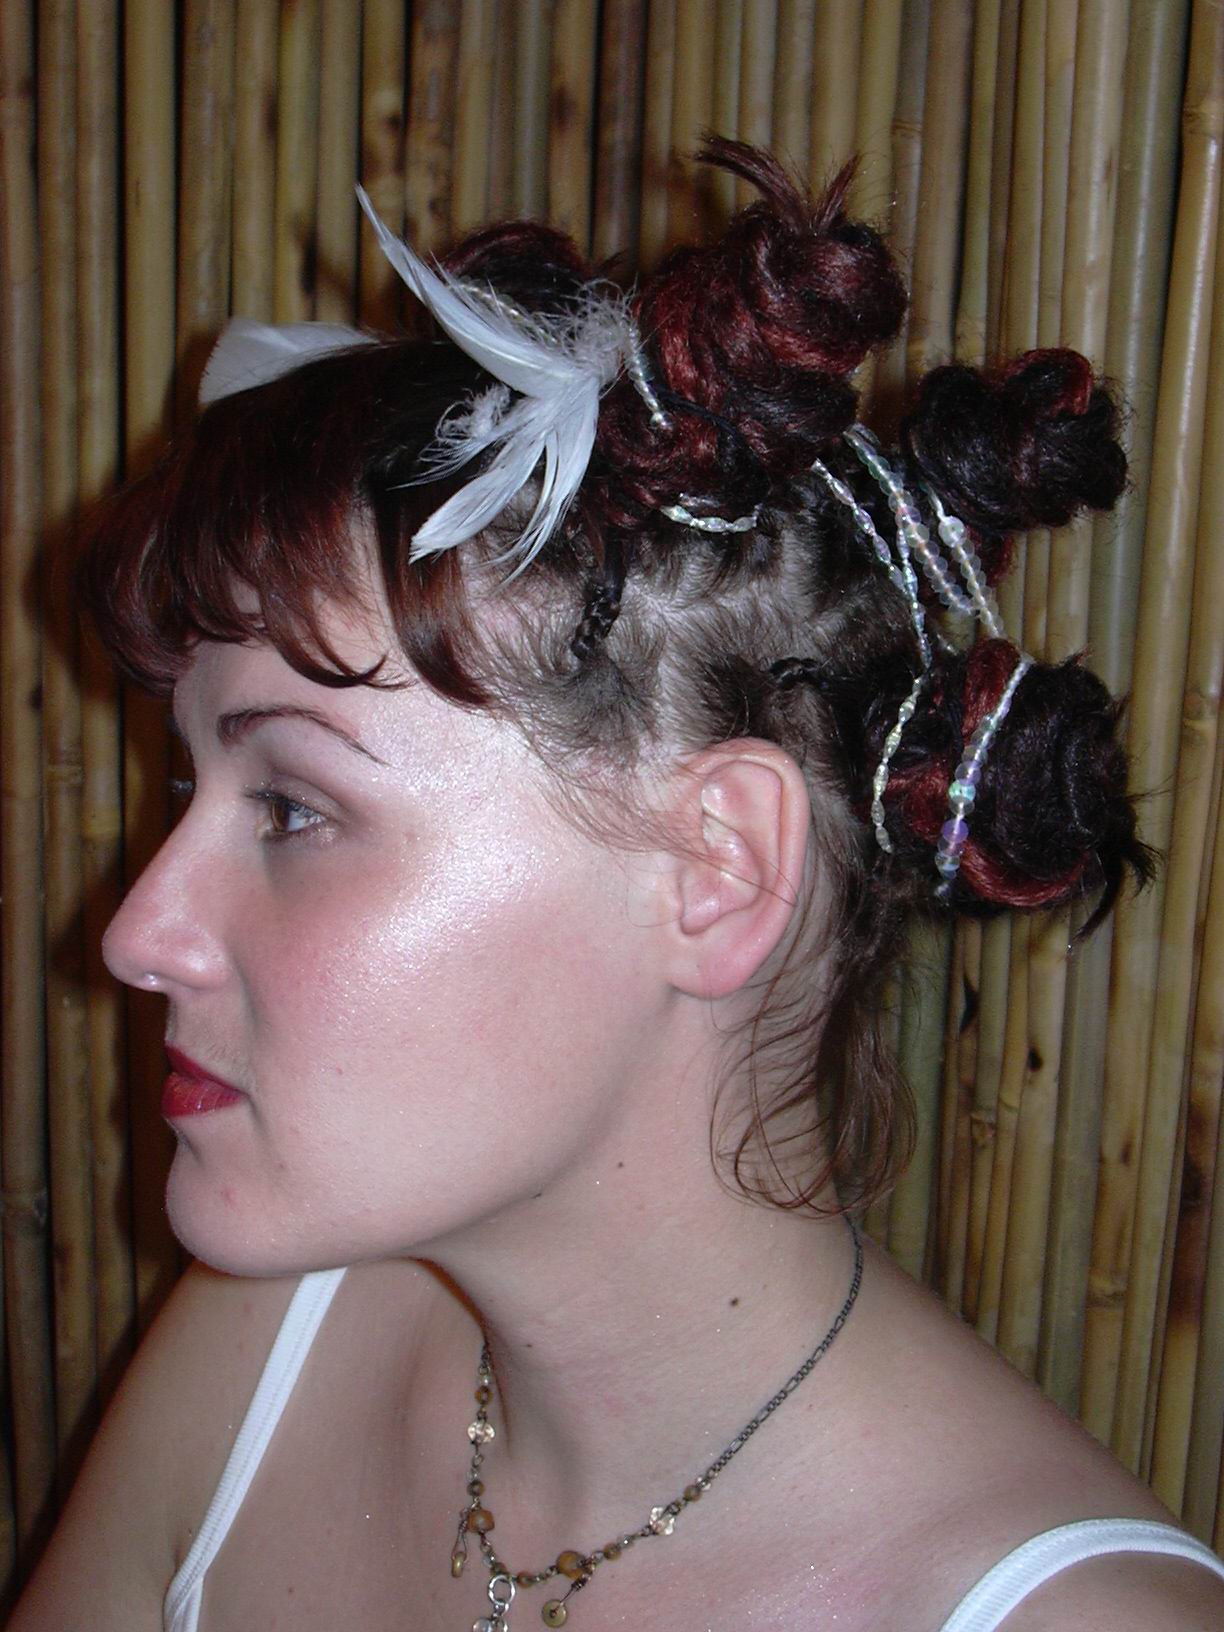 side view of woman in white camisole with neutral expression showing tightly wrapped bunches of dreadlocks